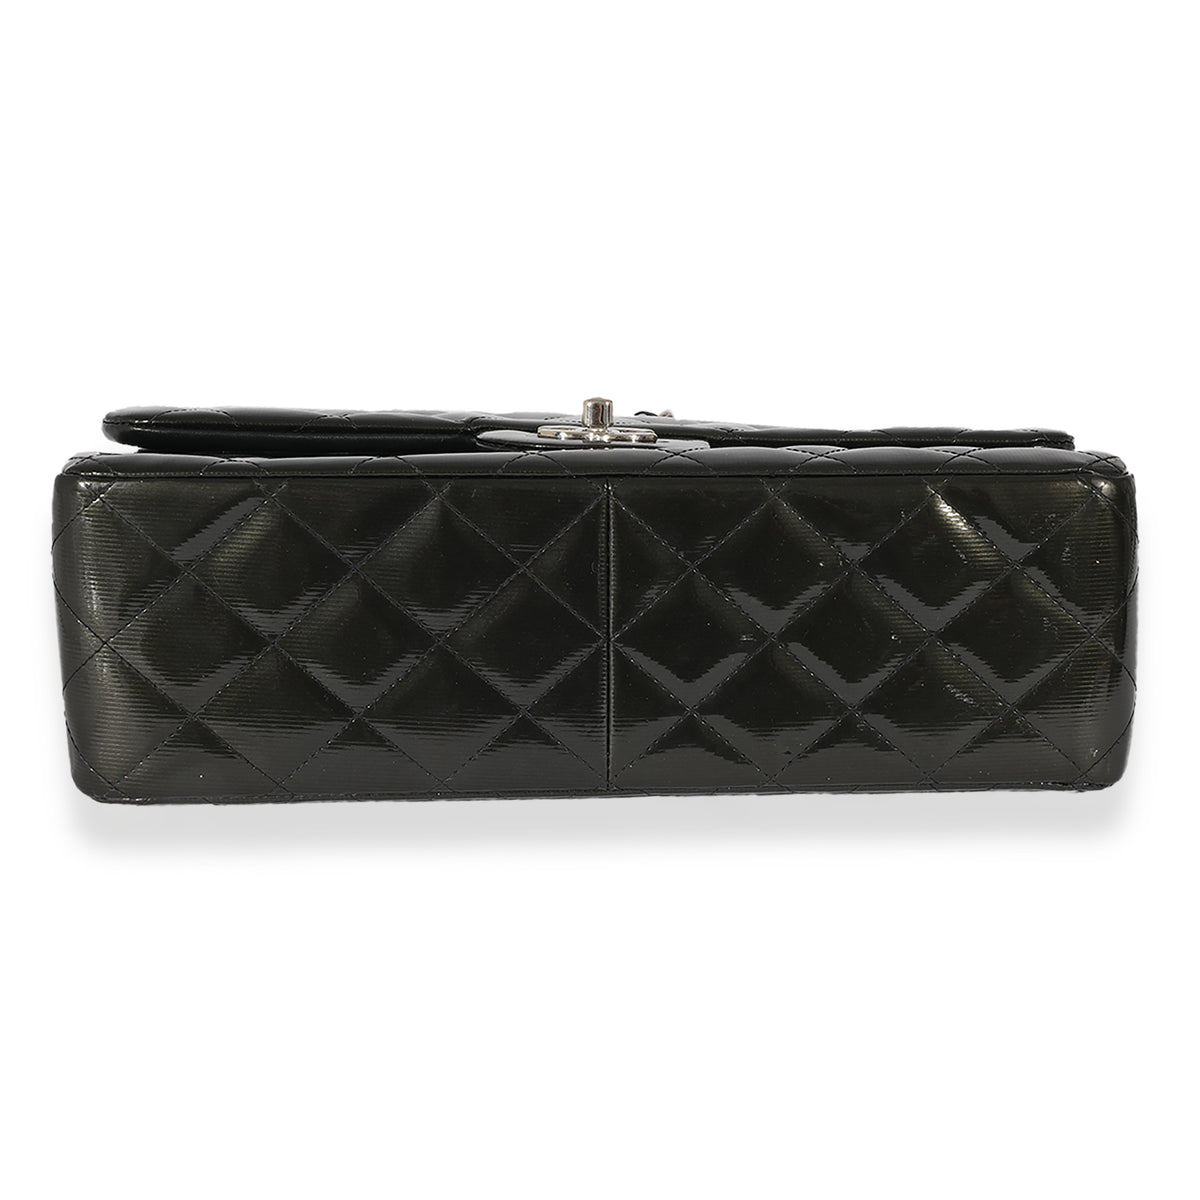 Chanel Black White Stripped Patent Leather Wallet